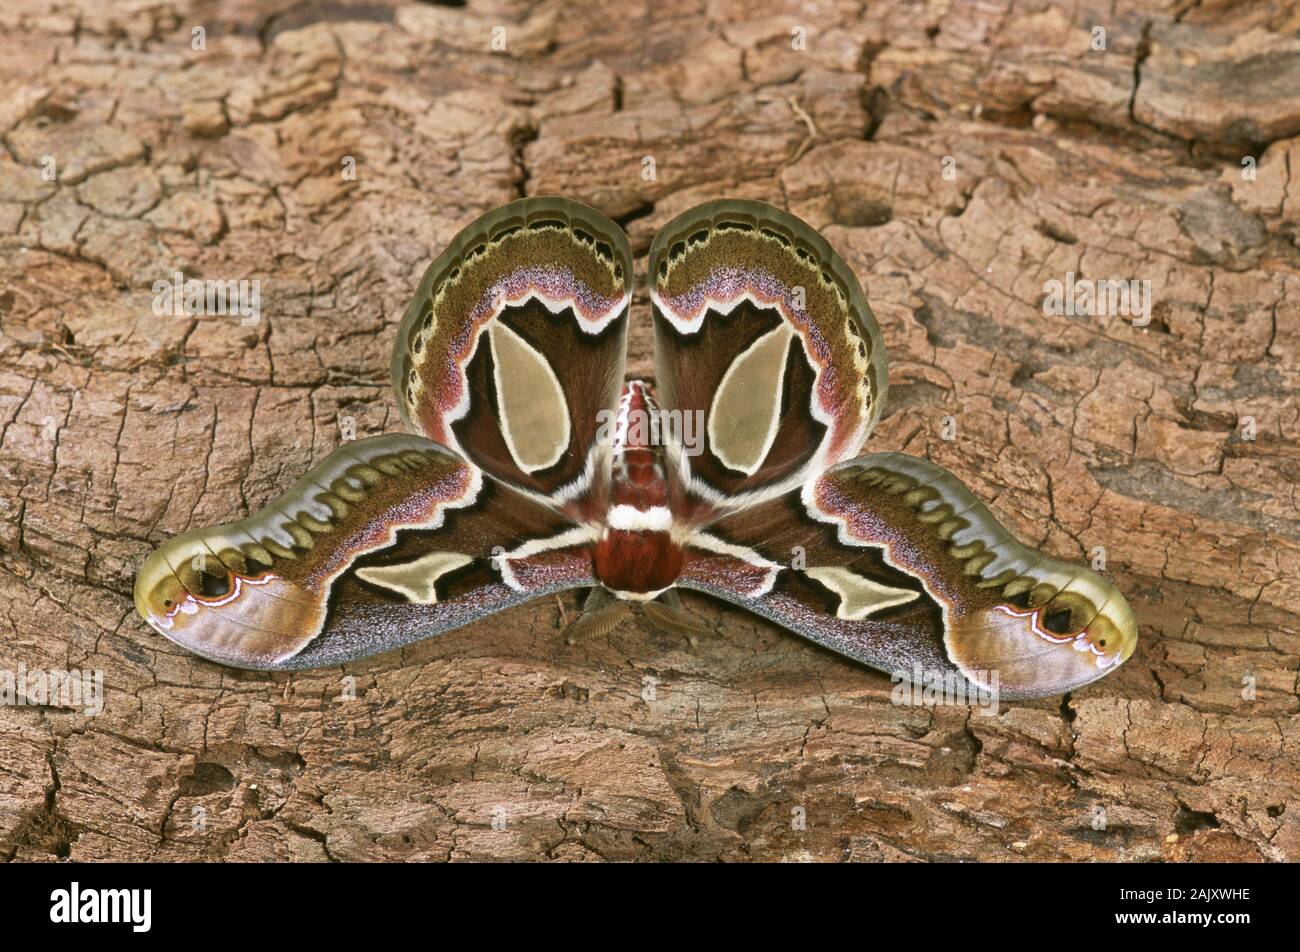 Rothschildia jacobaea  A saturnid moth found in Argentina and Brazil.  Adult resting with wings open showing hyaline wing windows. Stock Photo